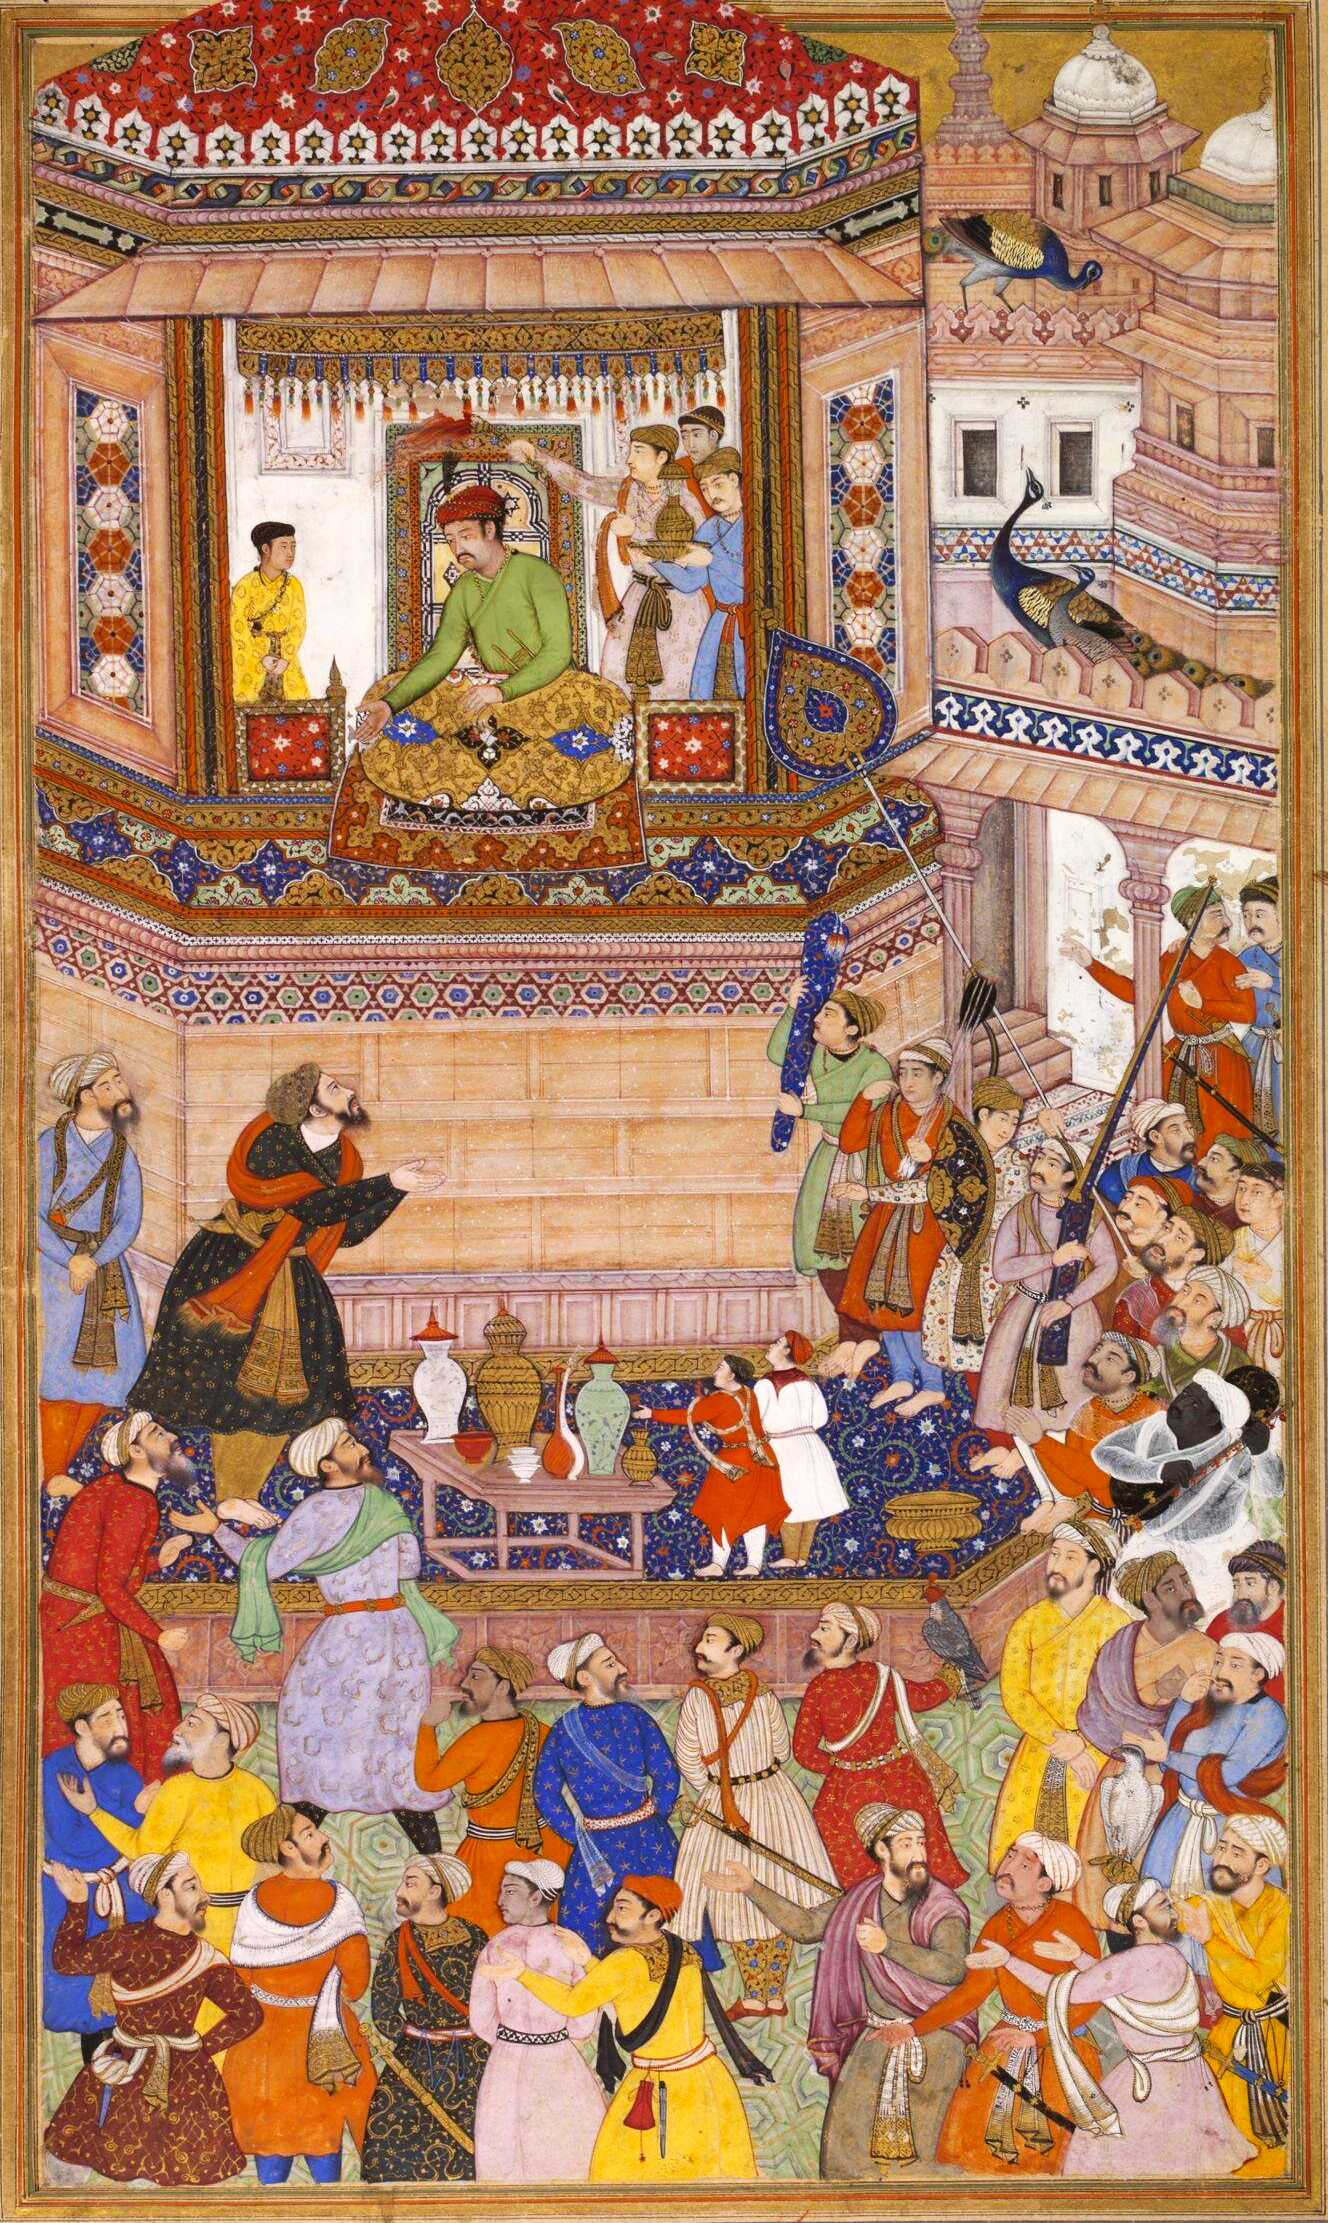 Husain Quli Khan Jahan presents prisoners of war from Gujarat to Emperor Akbar. Surrounded by a gathering of courtiers, Akbar is depicted observing from a balcony window, receiving Khan Jahan's respects.